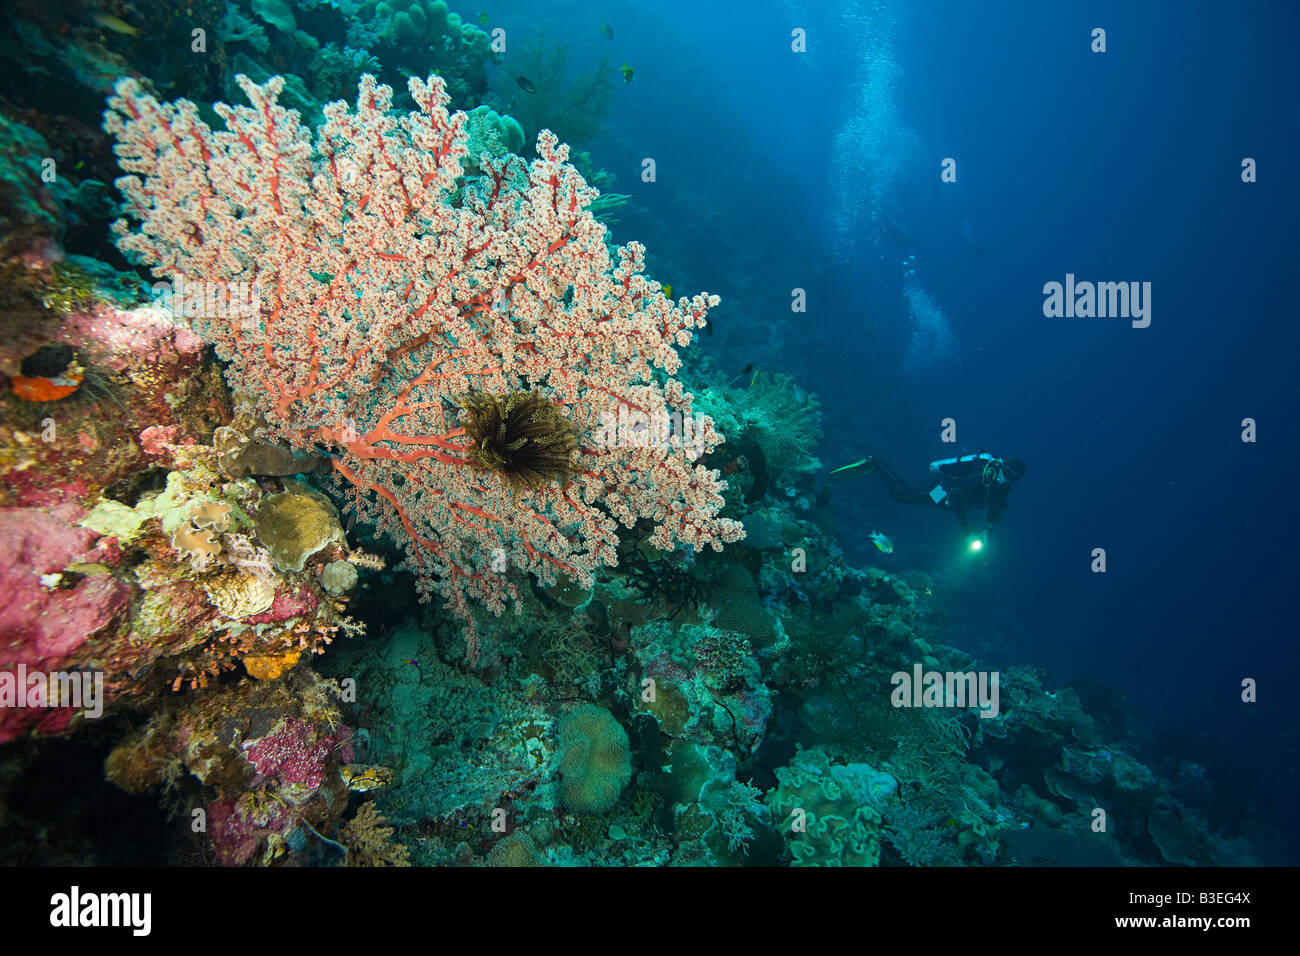 Scuba diver at coral reef Stock Photo